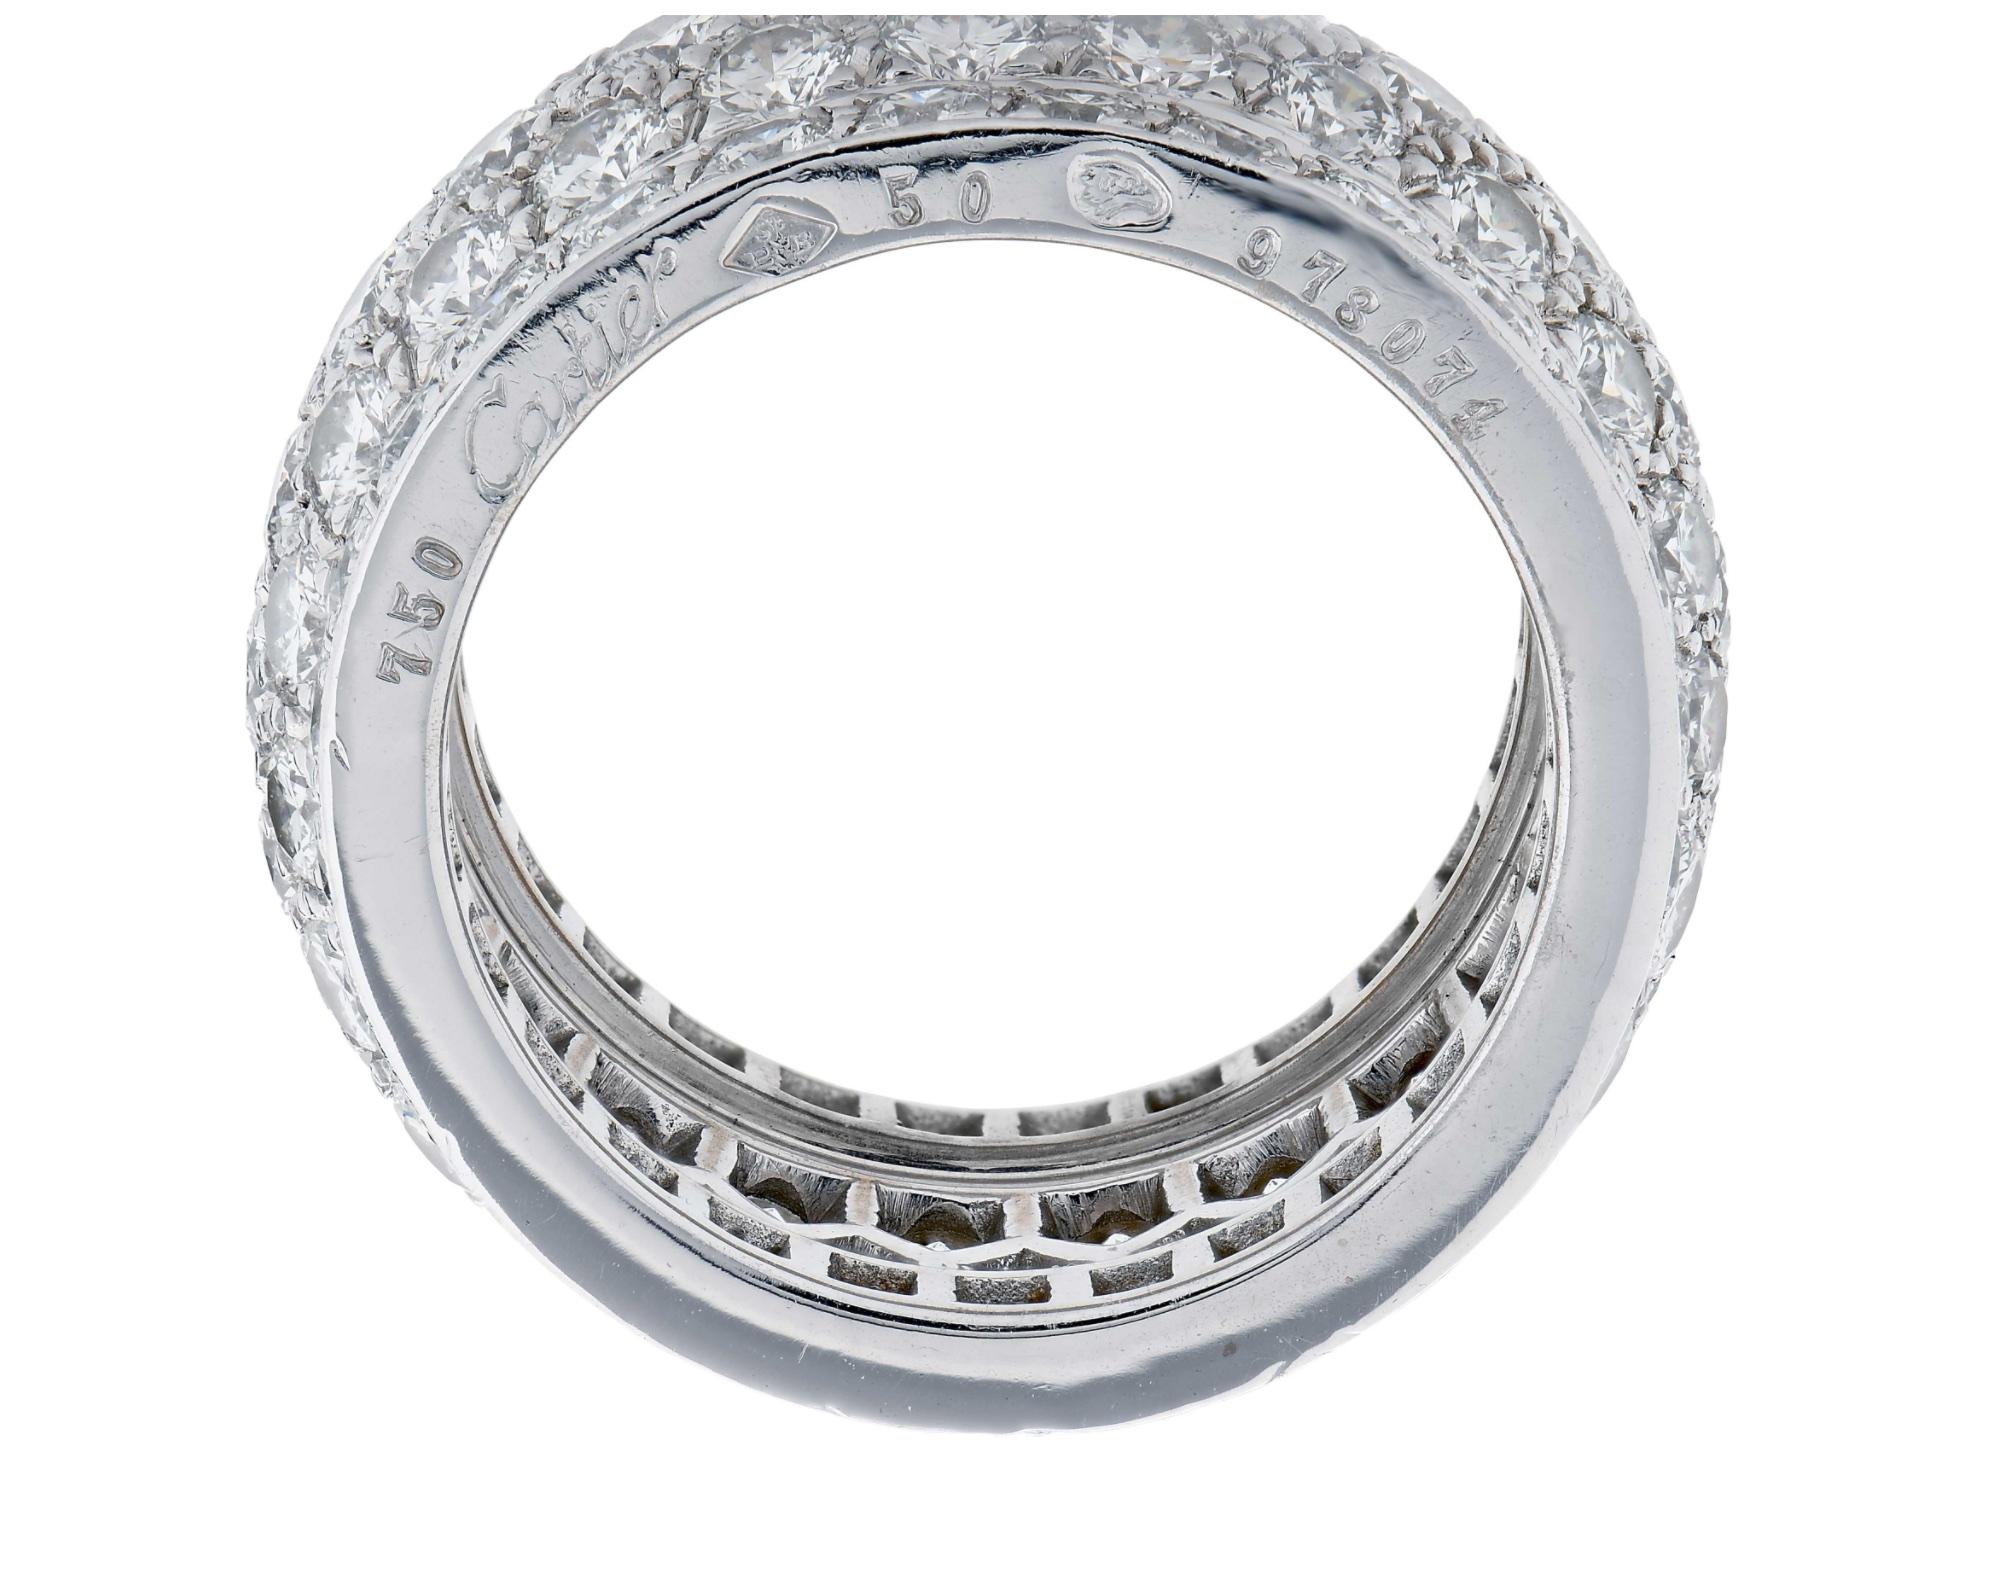 A band ring composed of five rows of pave-set diamonds, with a raised center; mounted in 18-karat white gold, with French assay marks 
• 122 brilliant-cut diamonds, F to VS or better, total weighing approximately 5.5 carats
• Signed Cartier,